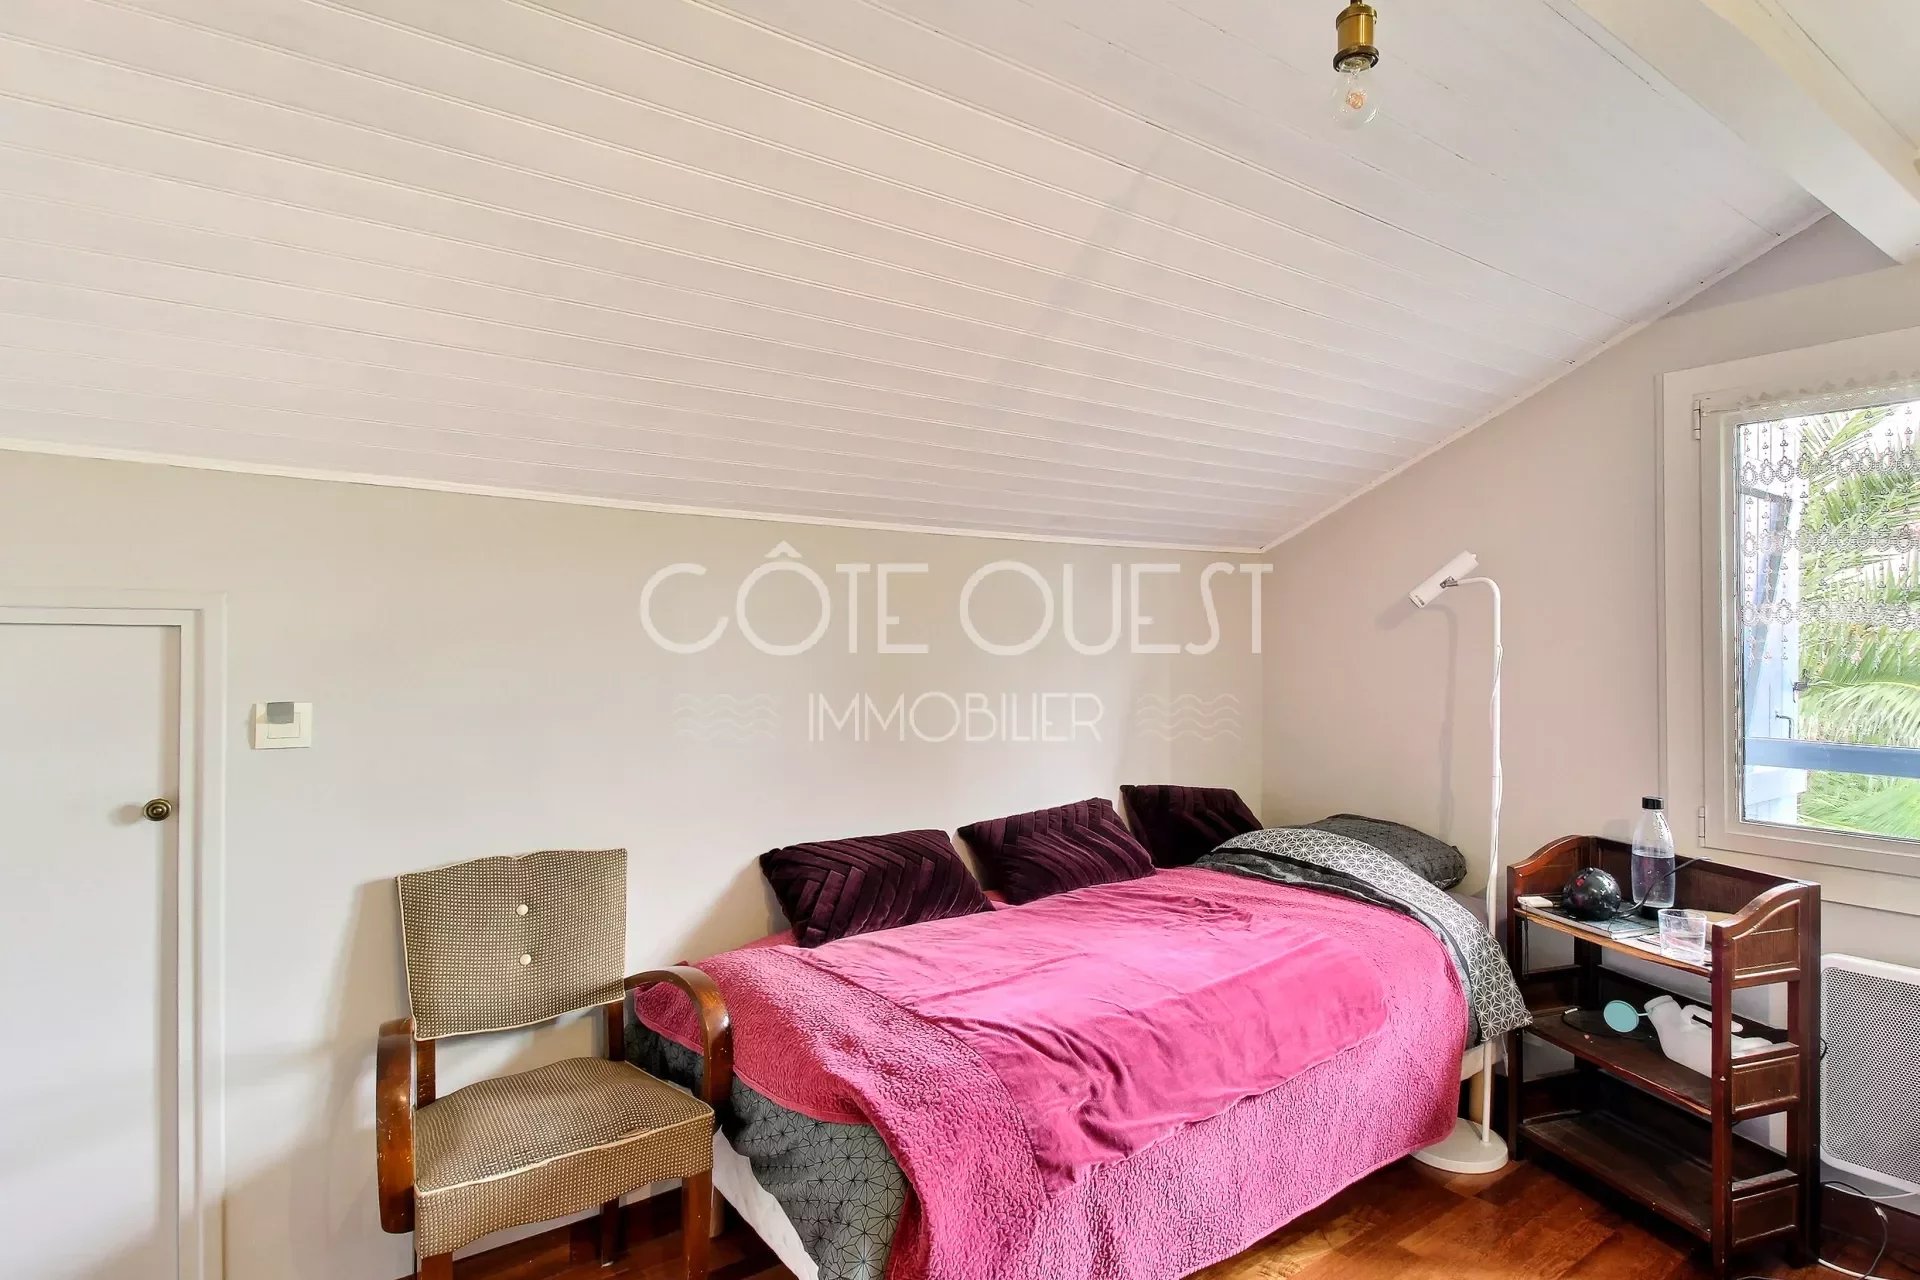 FOR SALE HOUSE WITH POOL IN SAINT JEAN DE LUZ